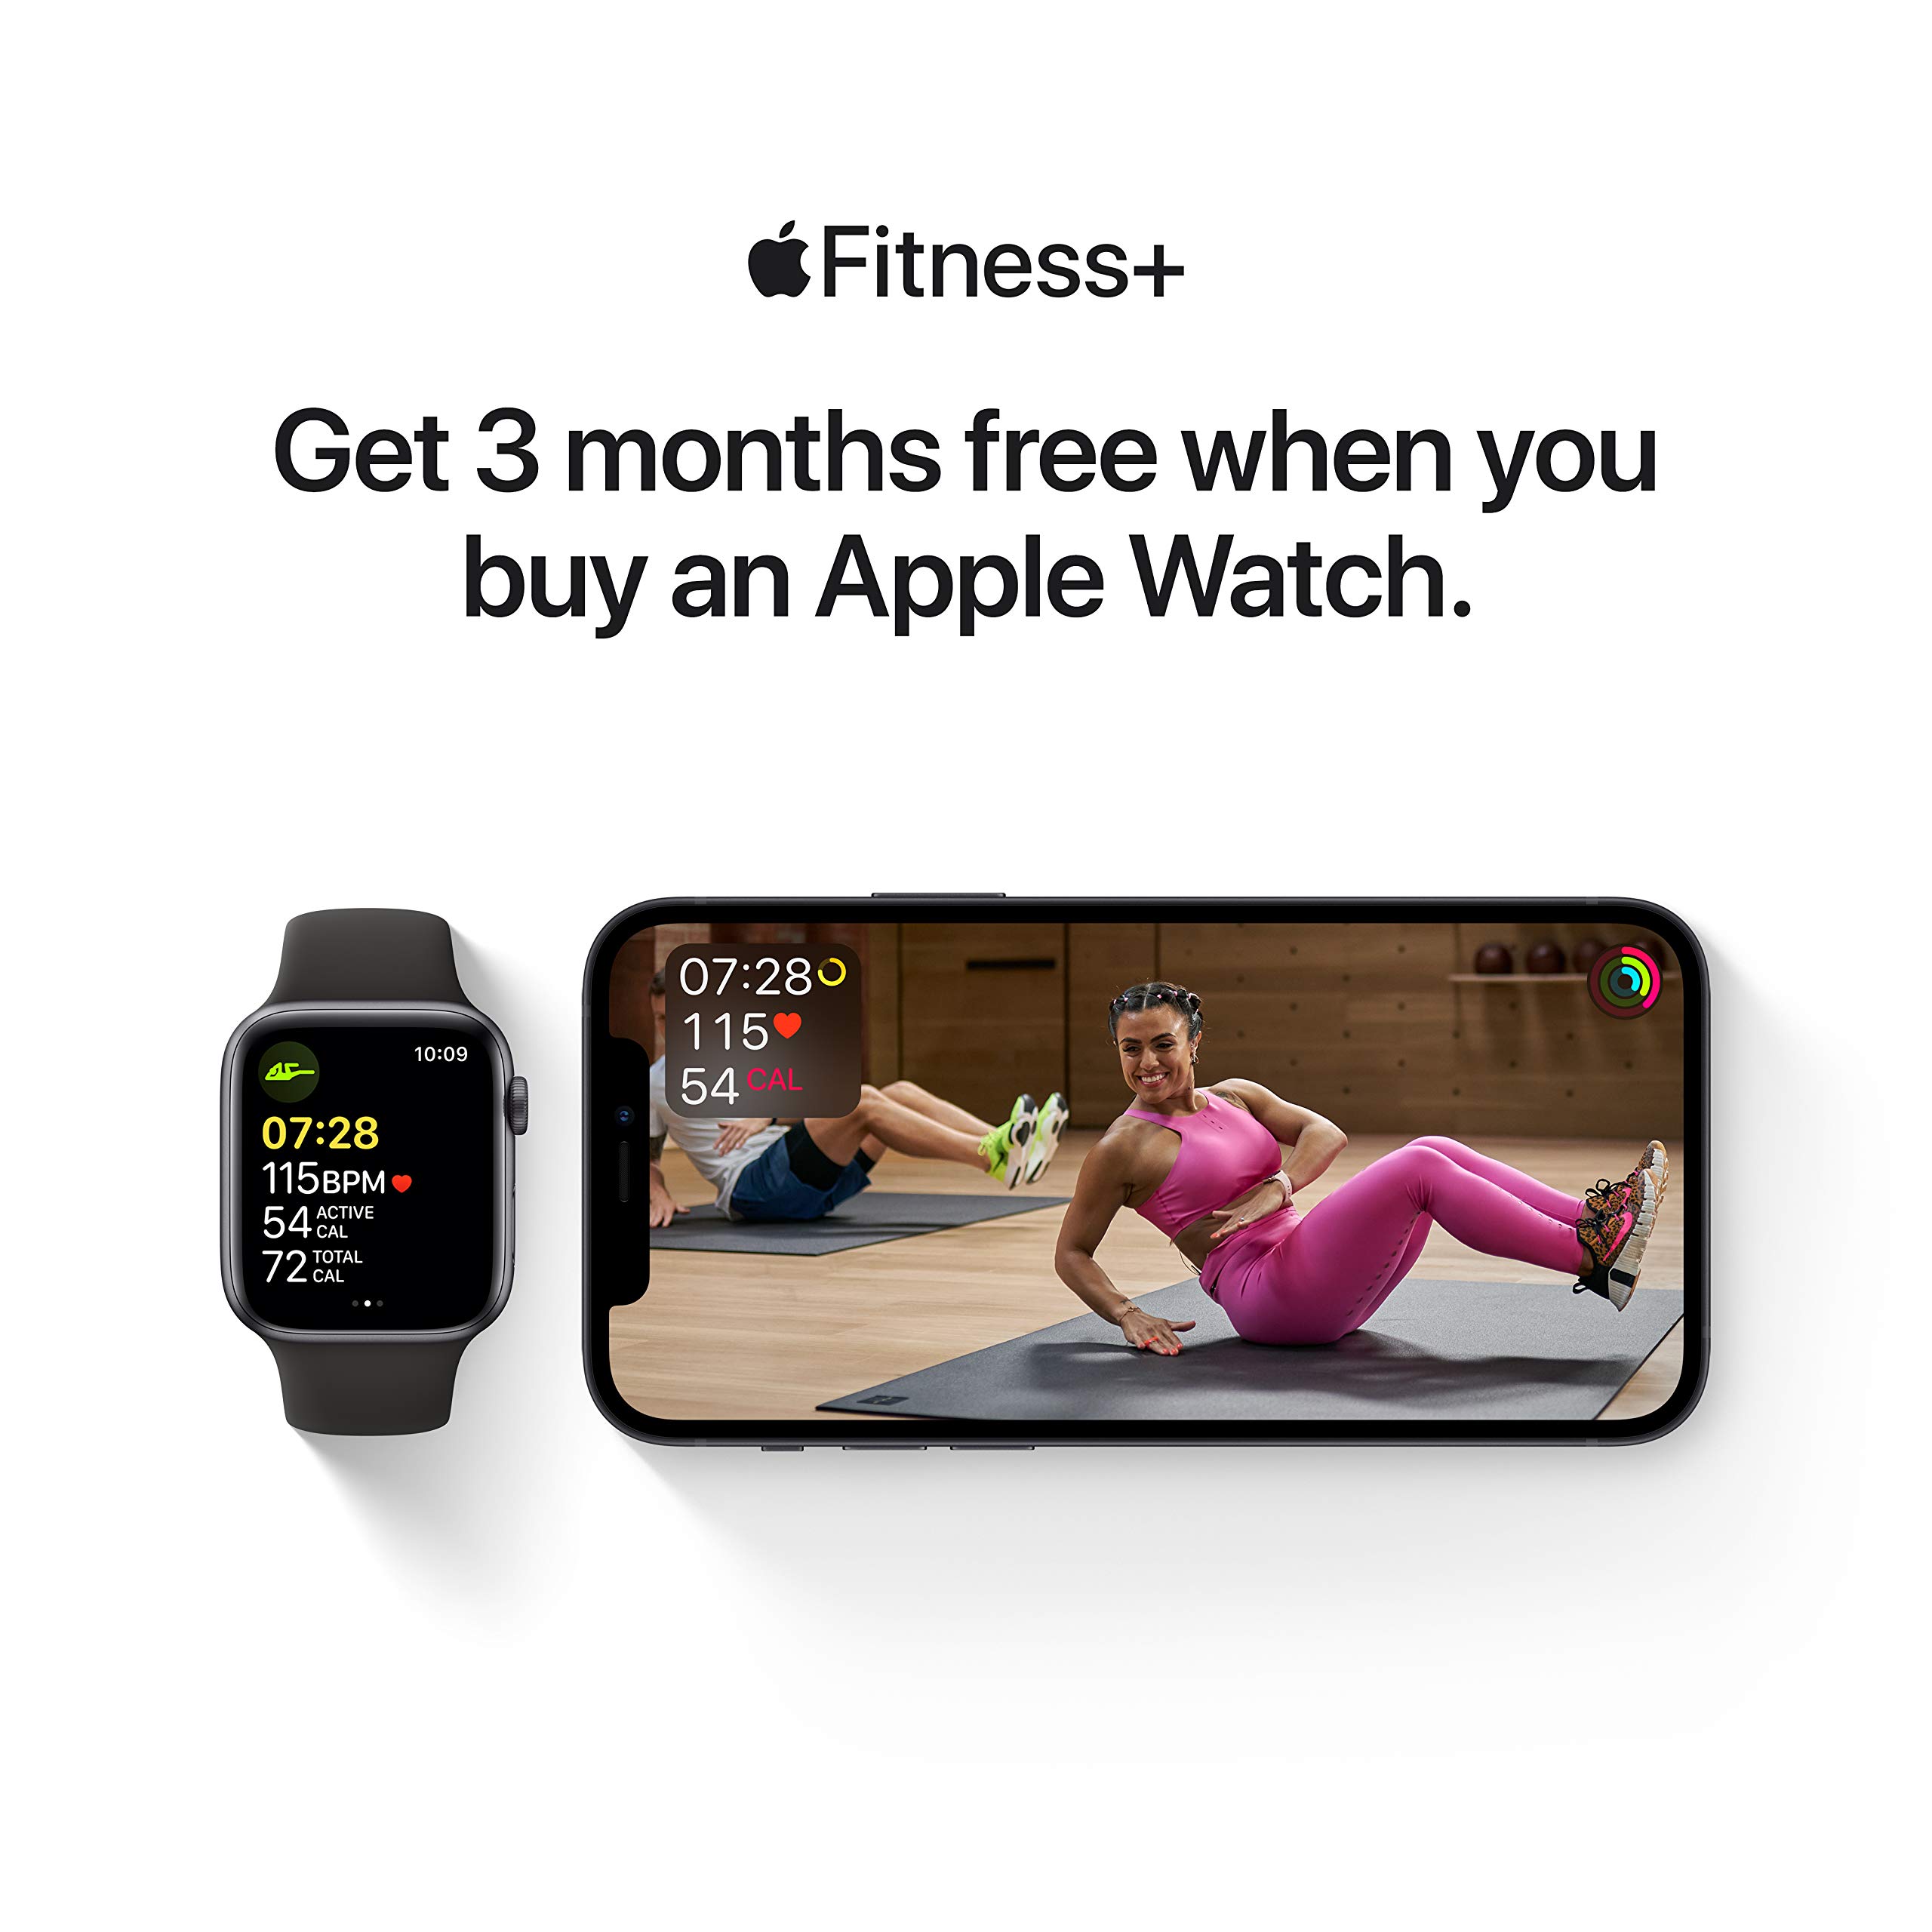 Apple Watch Series 3 [GPS 38mm] Smart Watch w/Space Gray Aluminum Case & Black Sport Band. Fitness & Activity Tracker, Heart Rate Monitor, Retina Display, Water Resistant